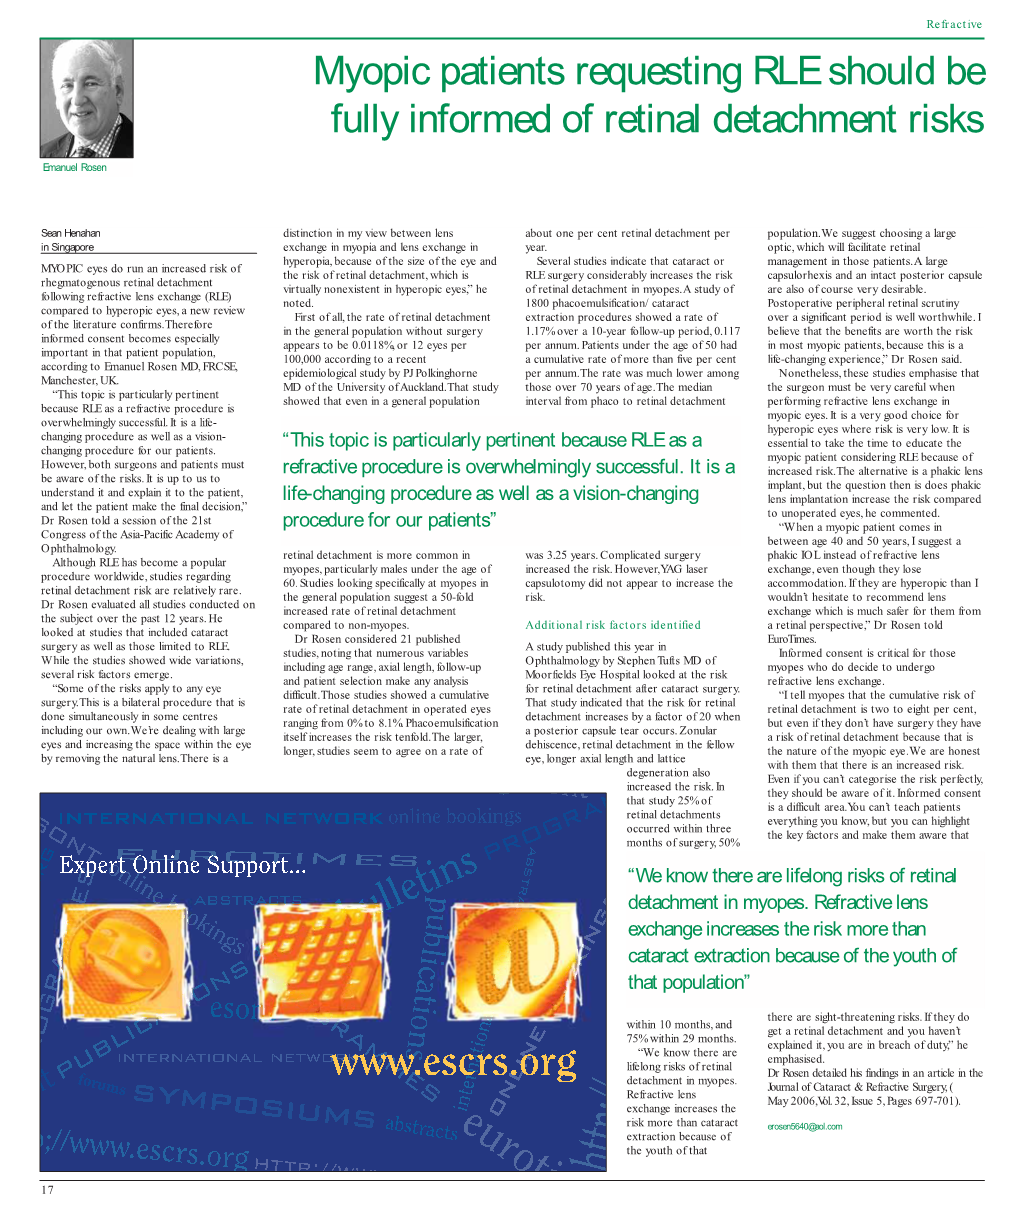 Myopic Patients Requesting RLE Should Be Fully Informed of Retinal Detachment Risks